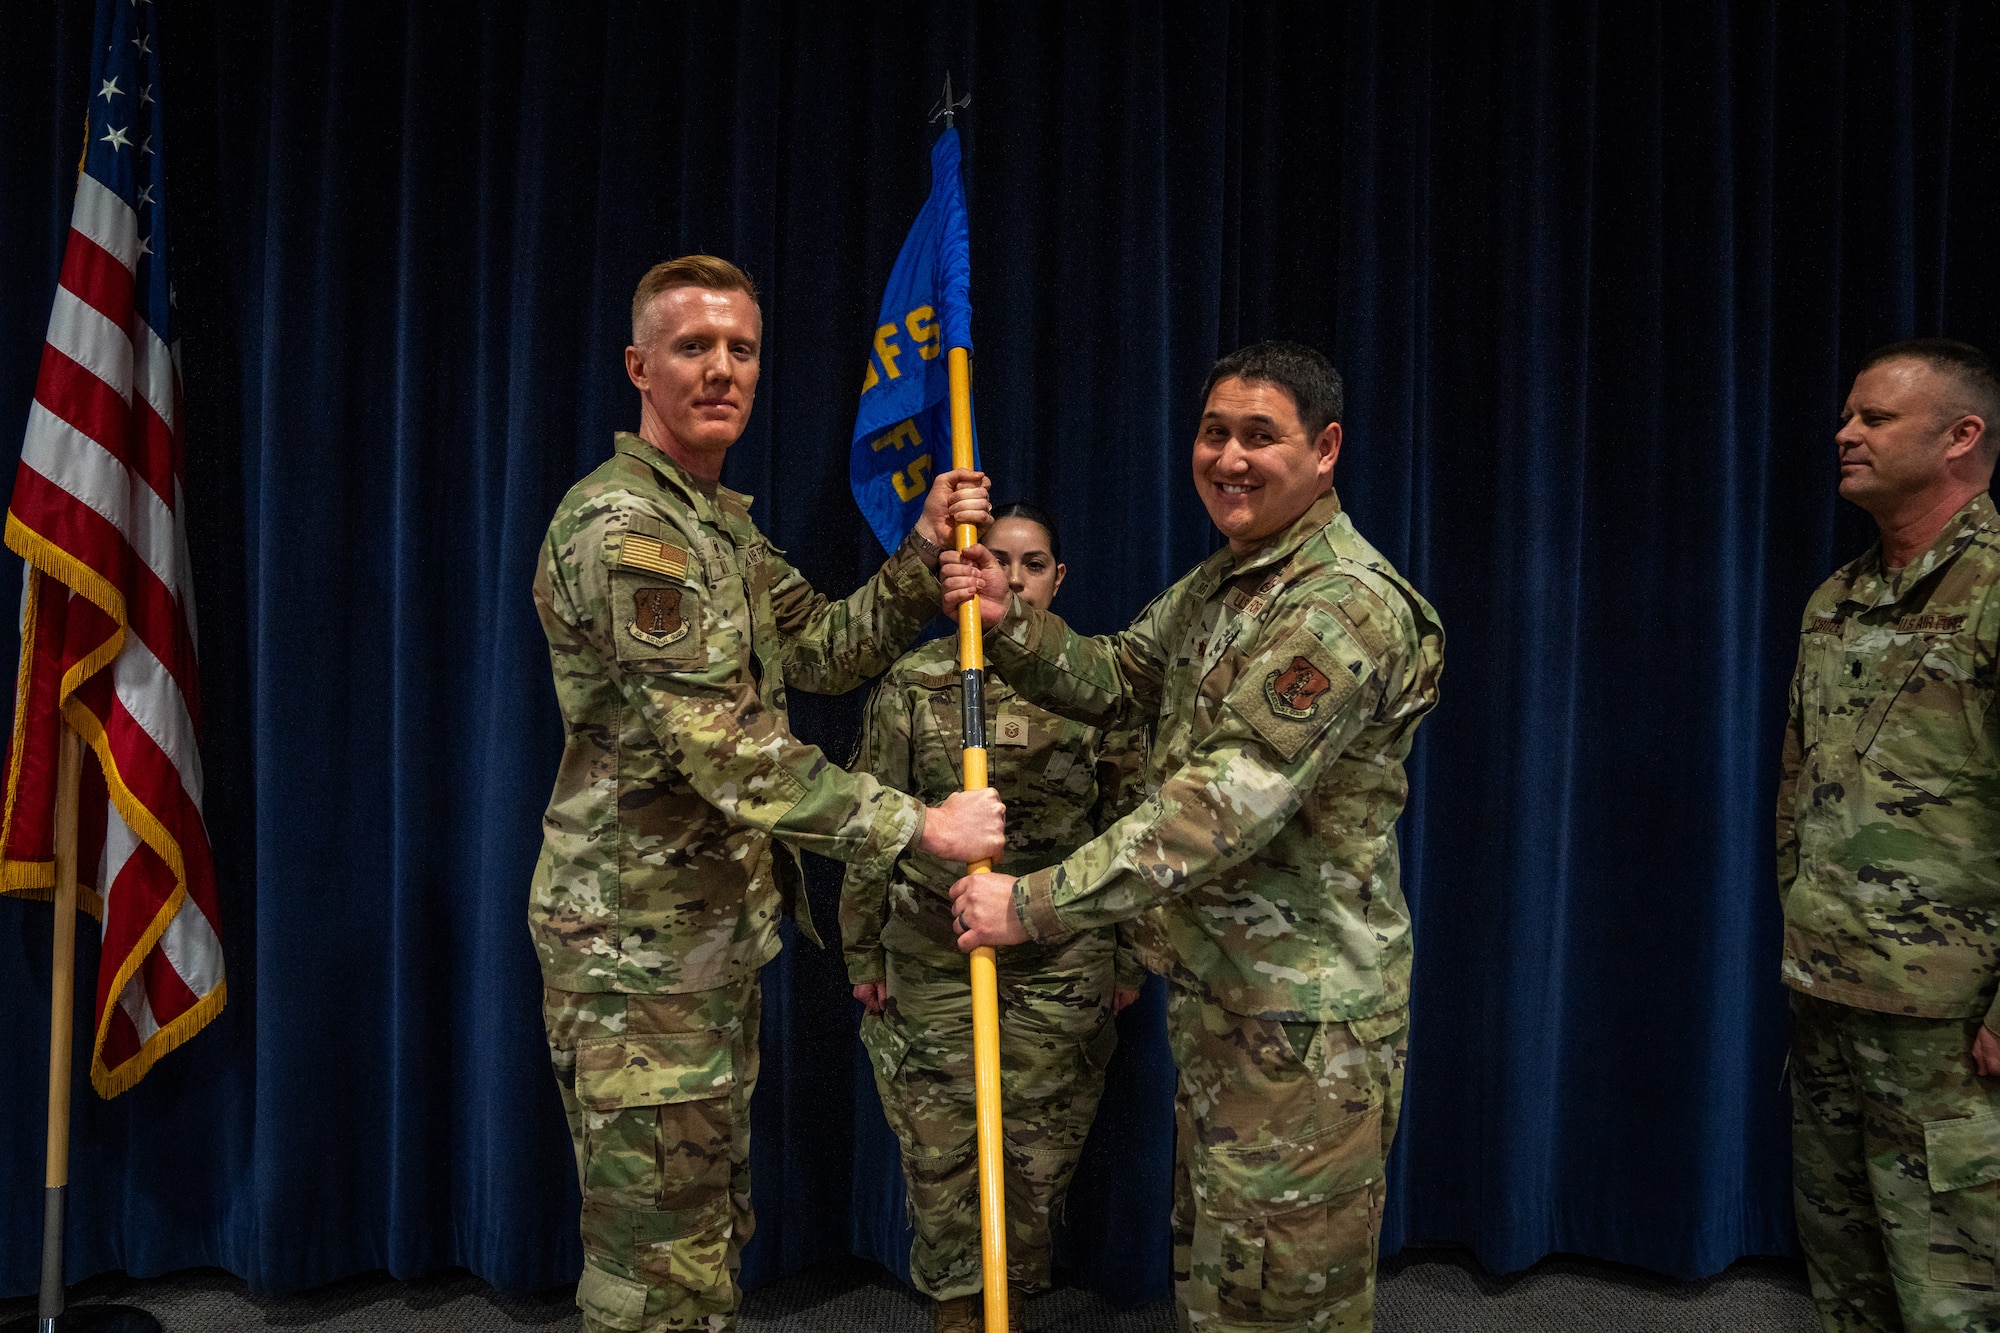 Roberts takes command of 152 SFS